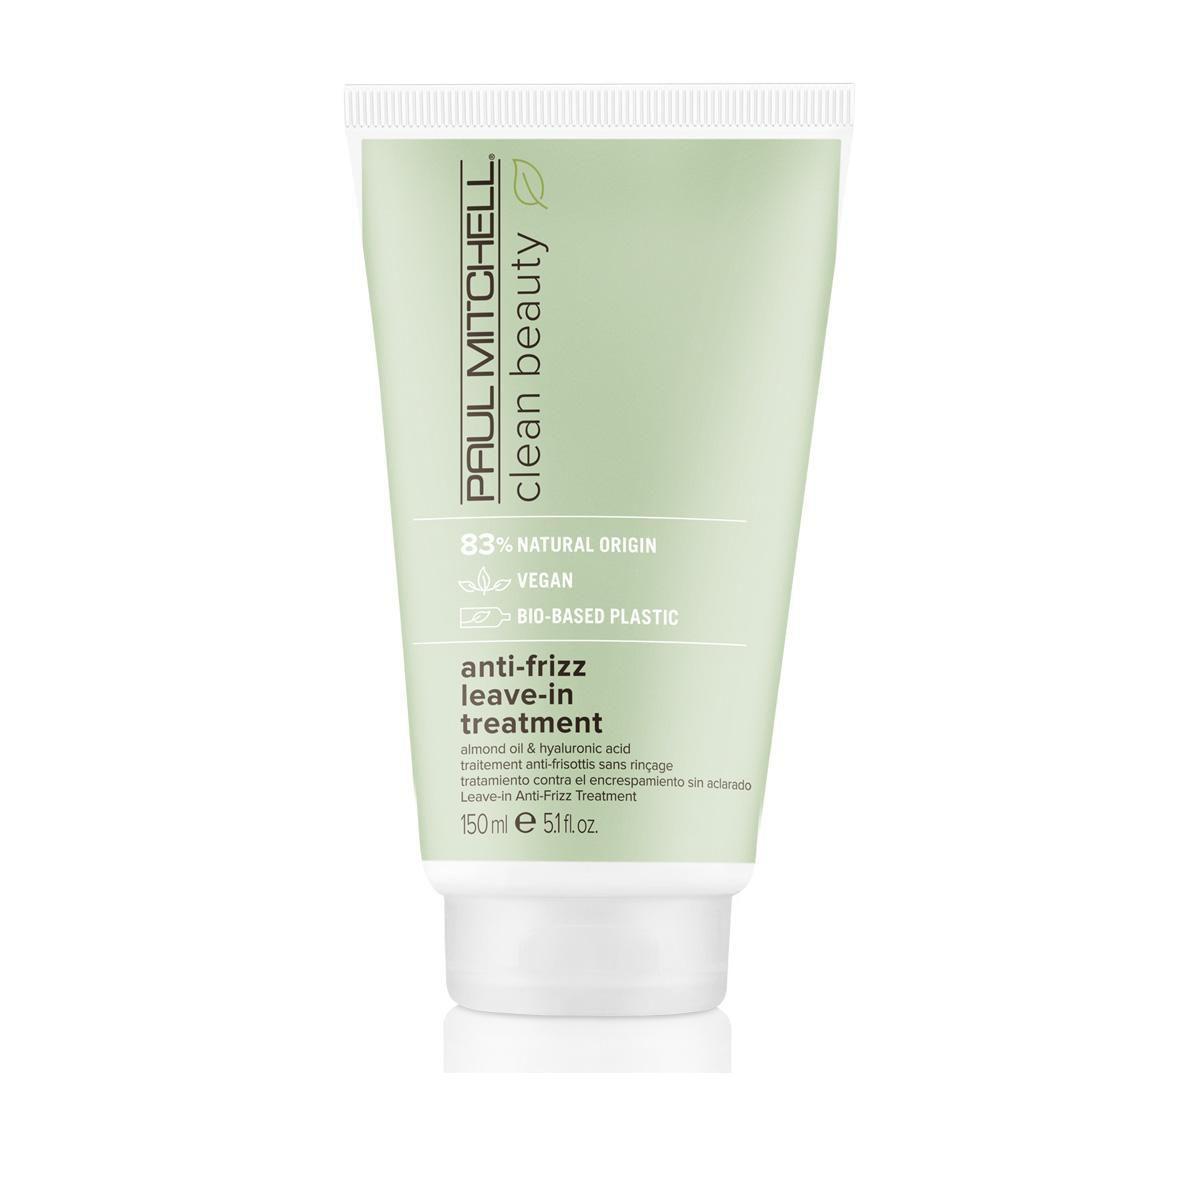 Paul Mitchell Clean Beauty Anti-Frizz Leave-in Treatment  - 150ml